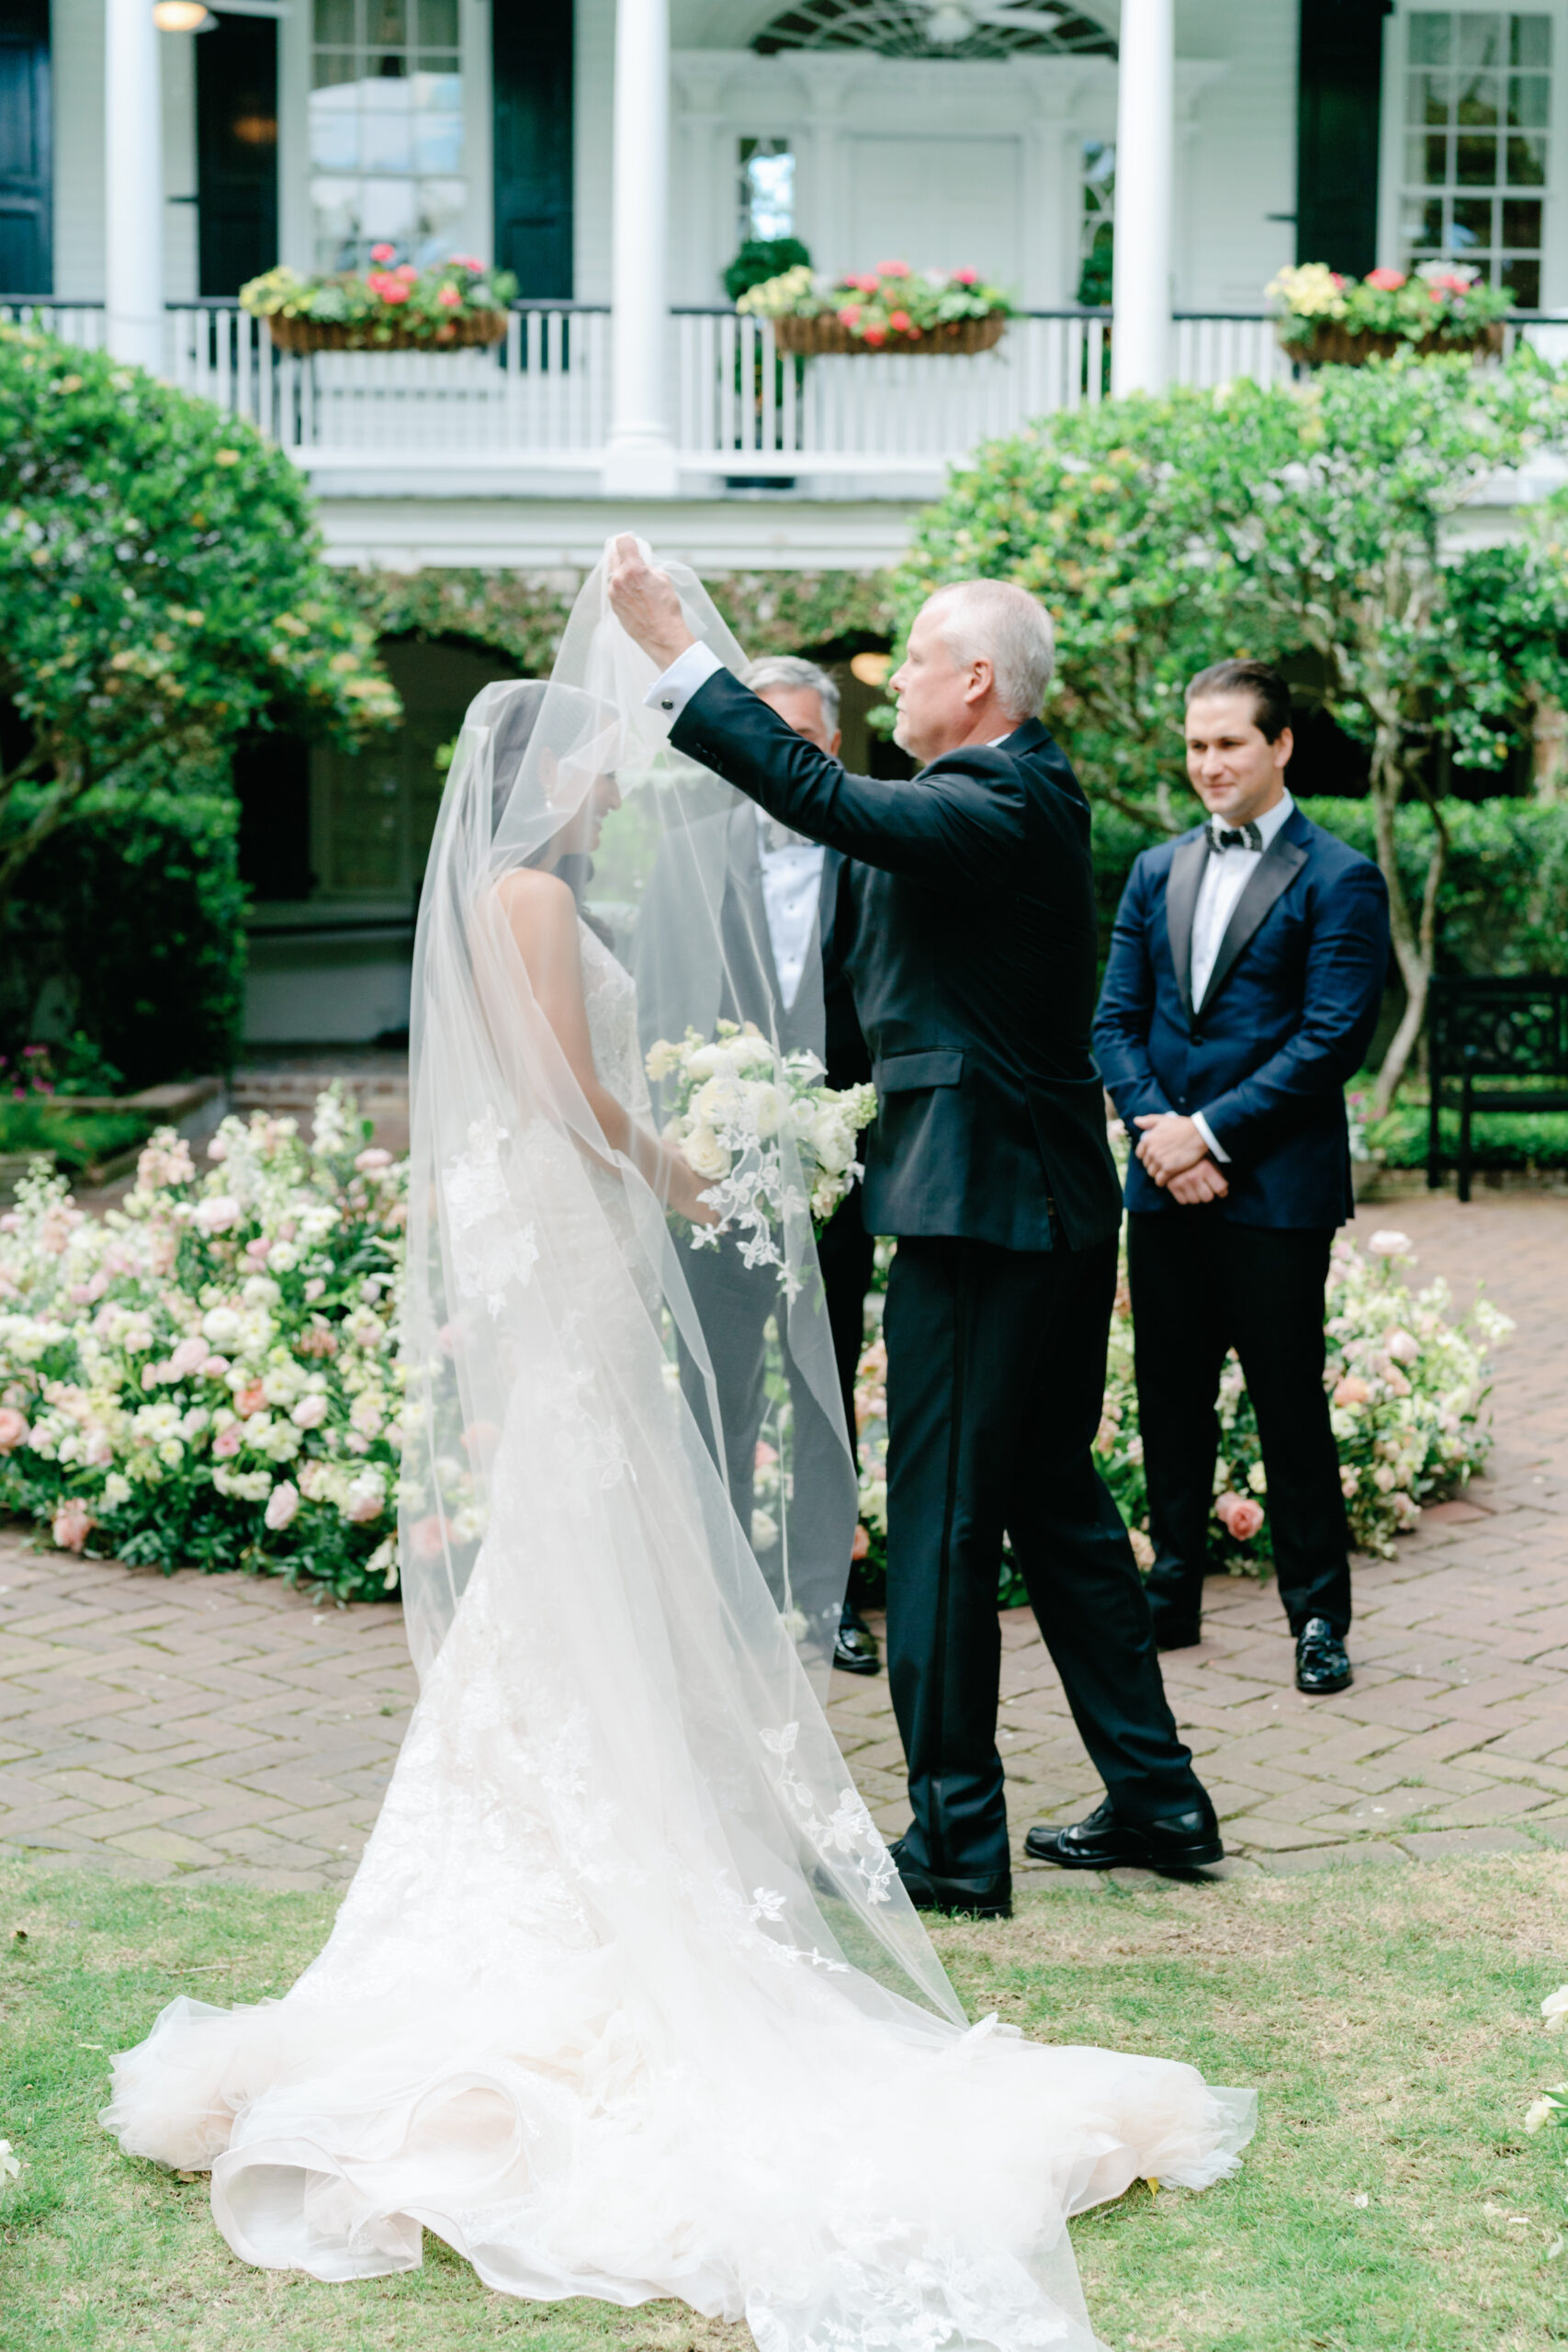 Father of the bride lifts veil at wedding ceremony.